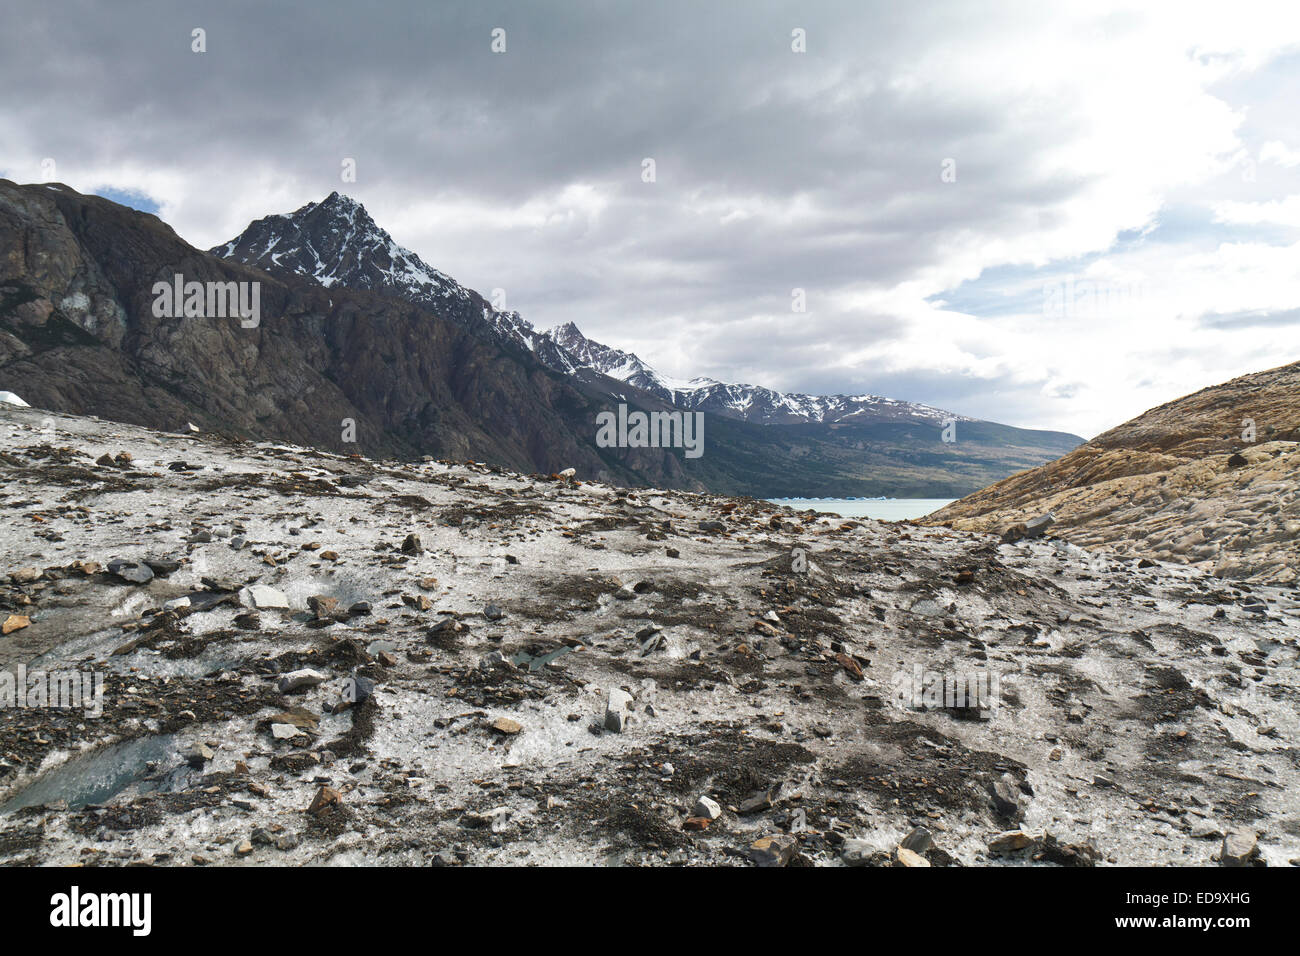 Evidence of the erosion caused by the Viedma Glacier in Argentina Patagonia Stock Photo